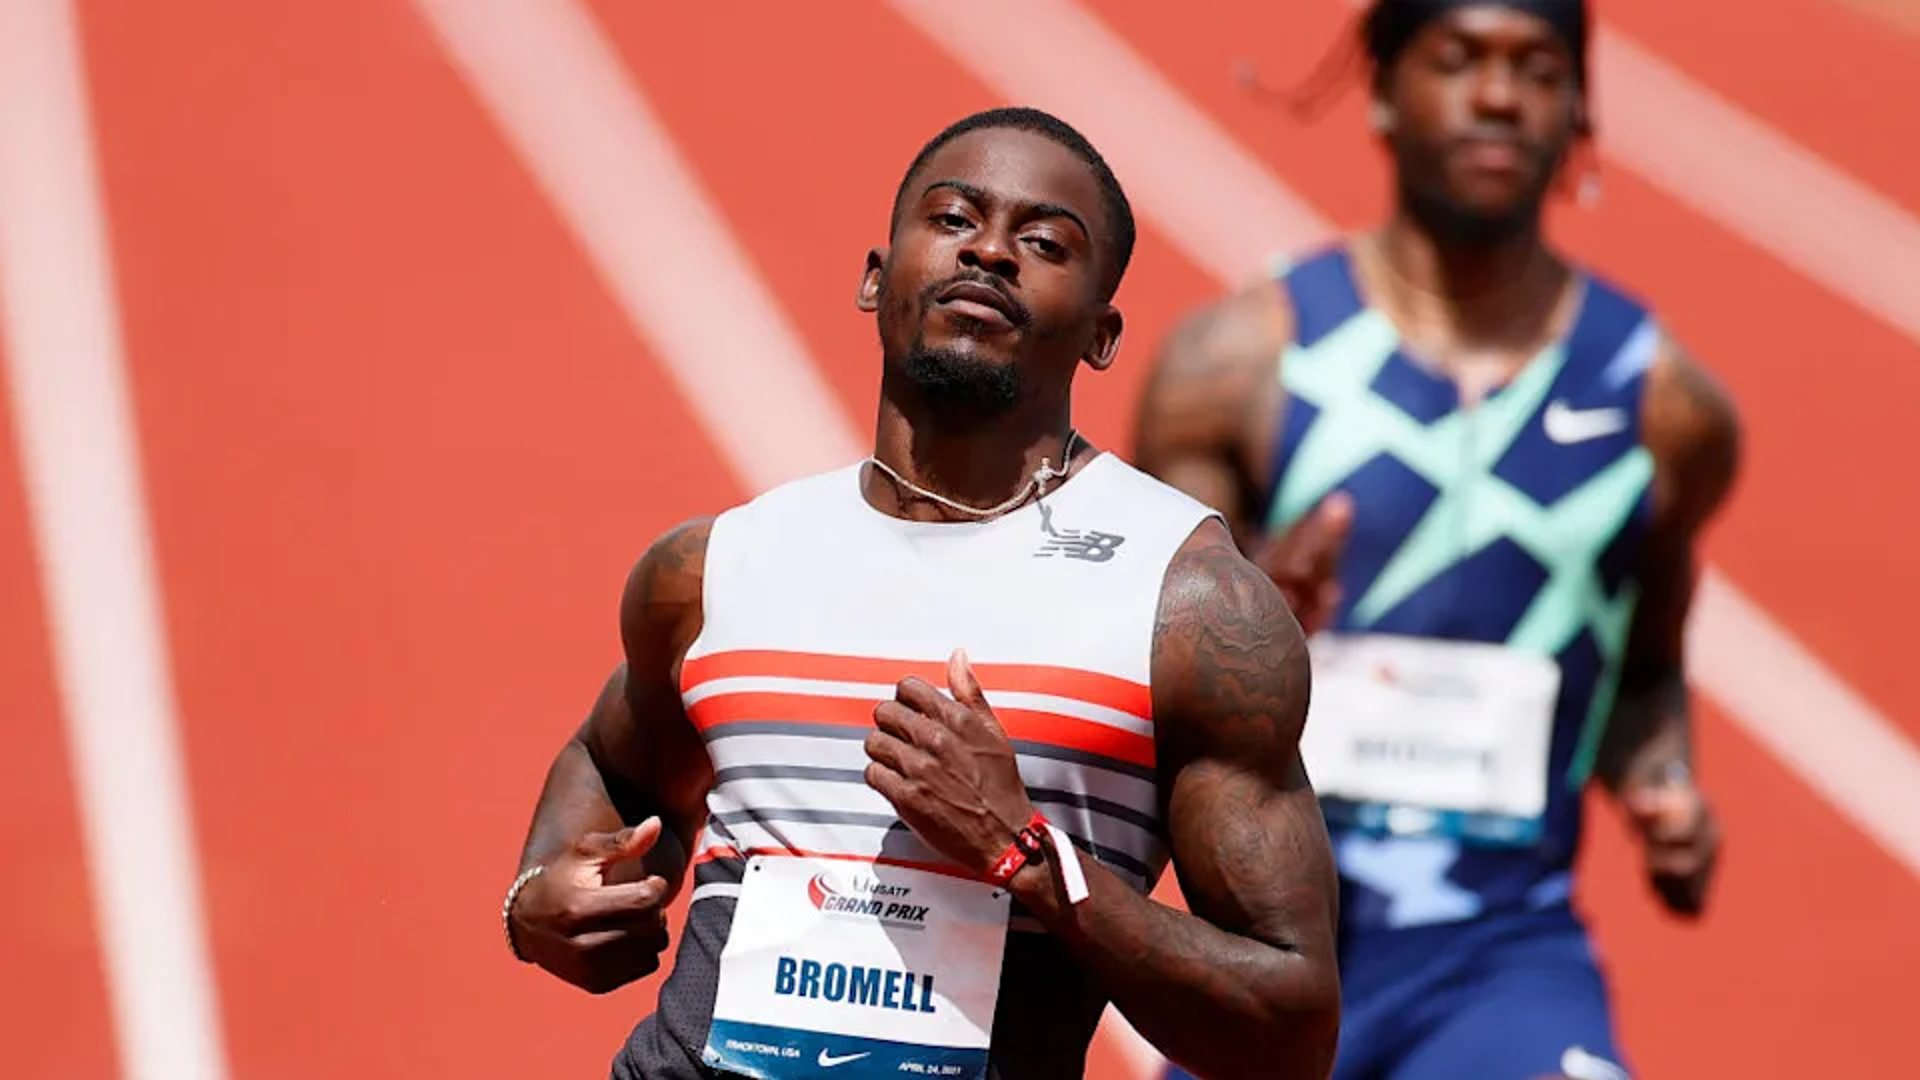 Trayvon Bromell in a file photo (Image Credits - Olympics.com)